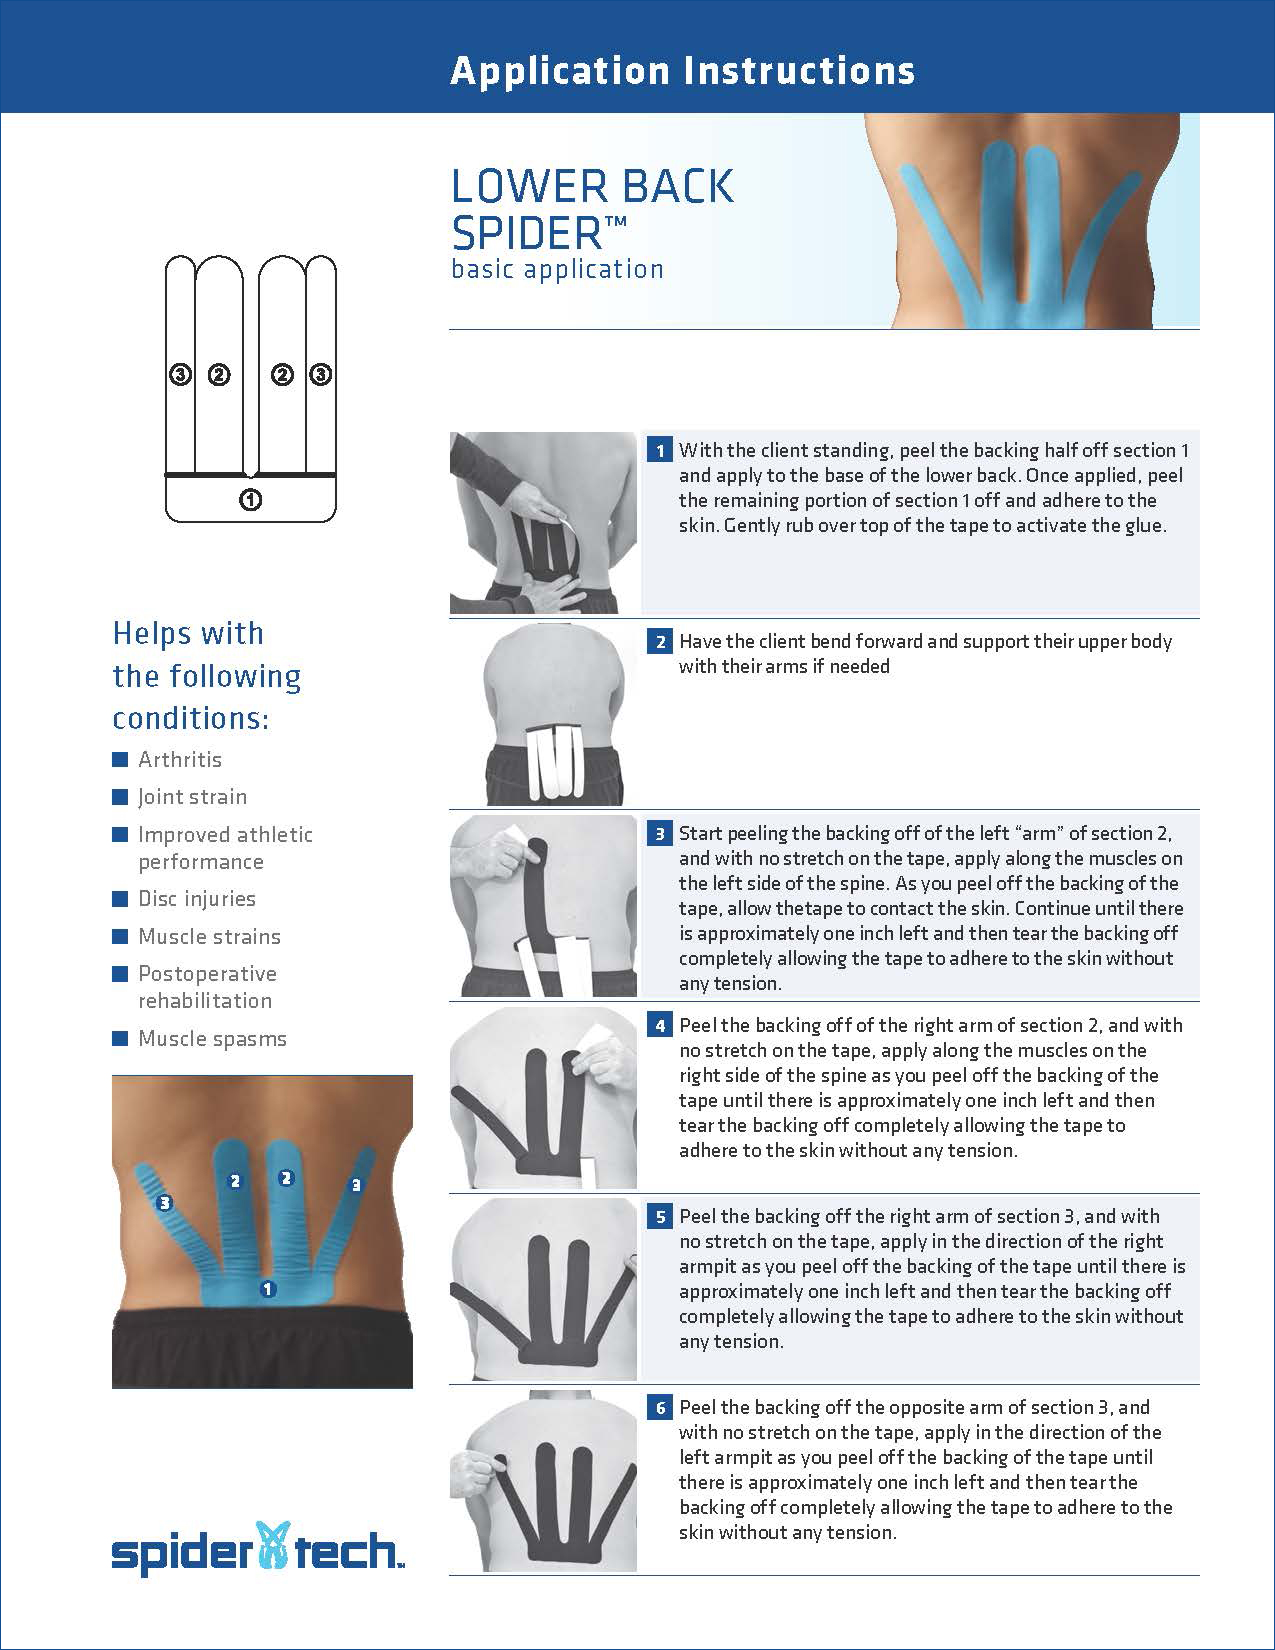 SpiderTech-Lower-Back-Spider-Application-Instructions